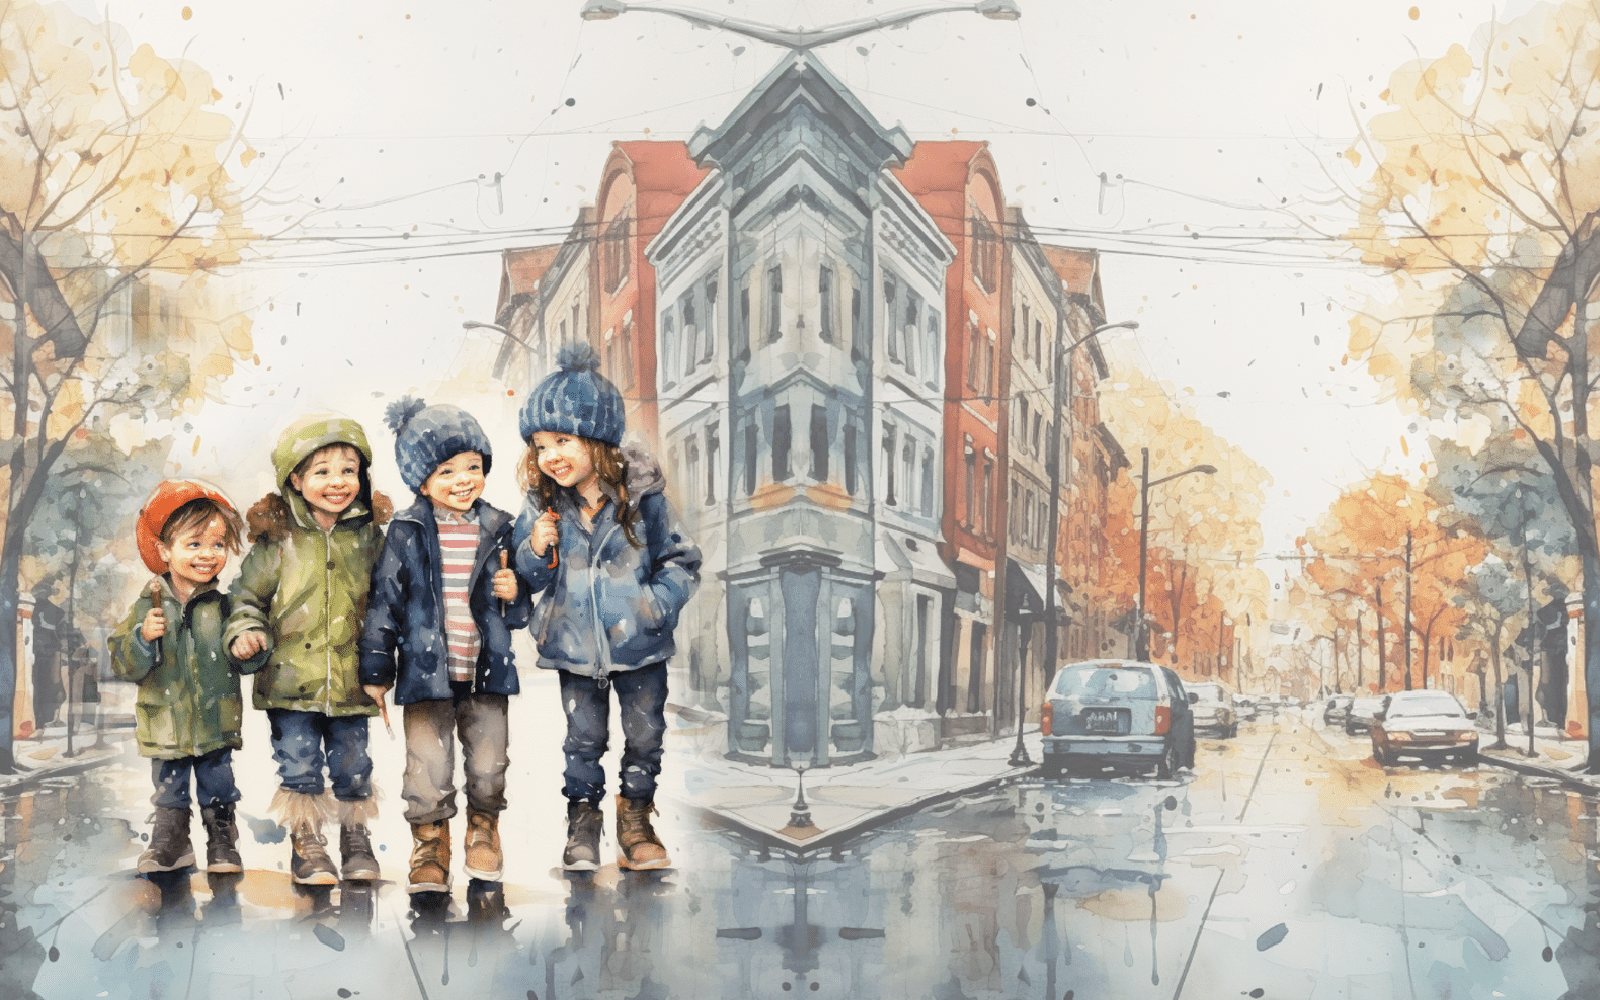 Kids in coats and hats in the rain 1600 x 1000